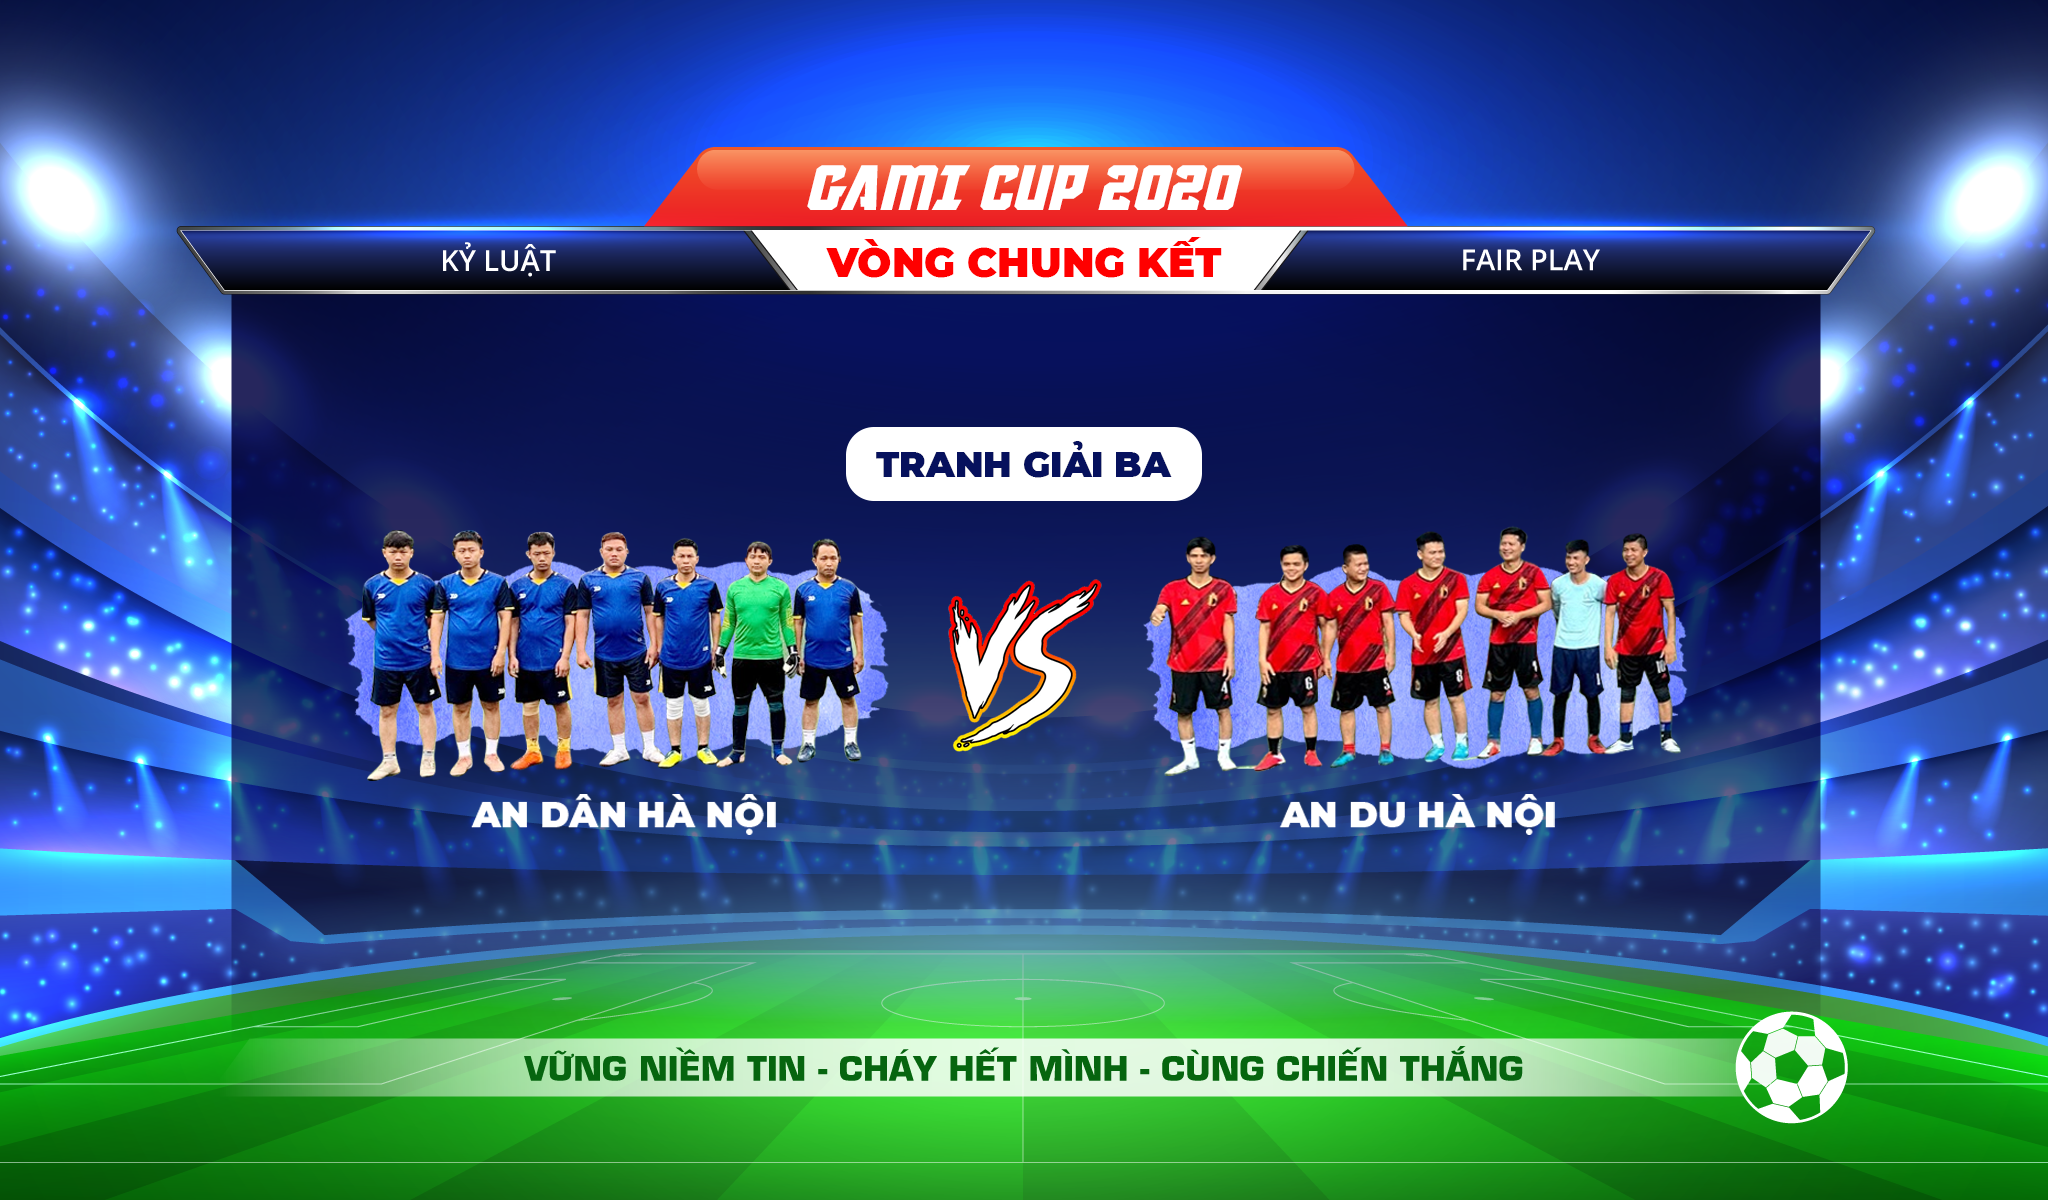 Poster Tranh34Gamicup2020